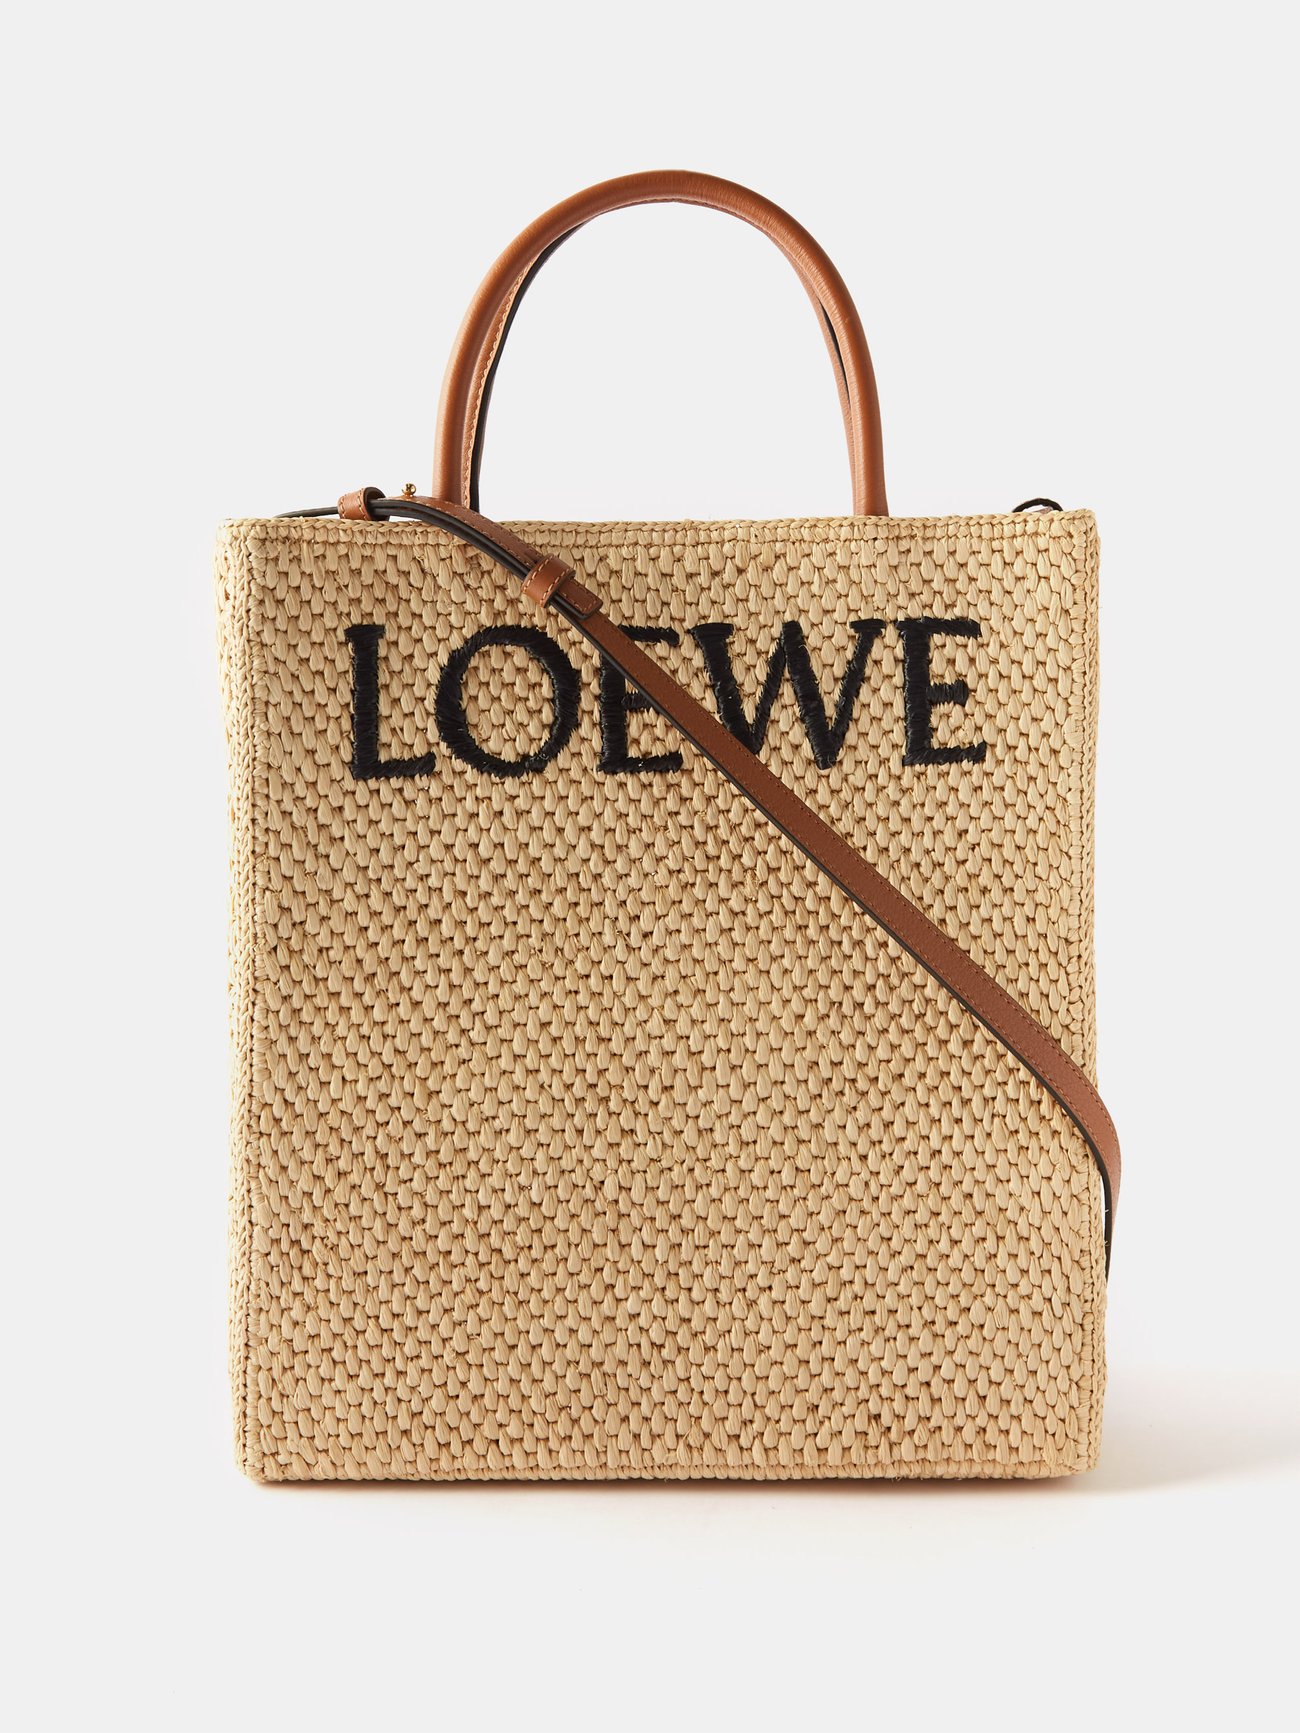 Loewe's New Basket Bag Has Arrived—Shop the Chic Style Here | Who What Wear